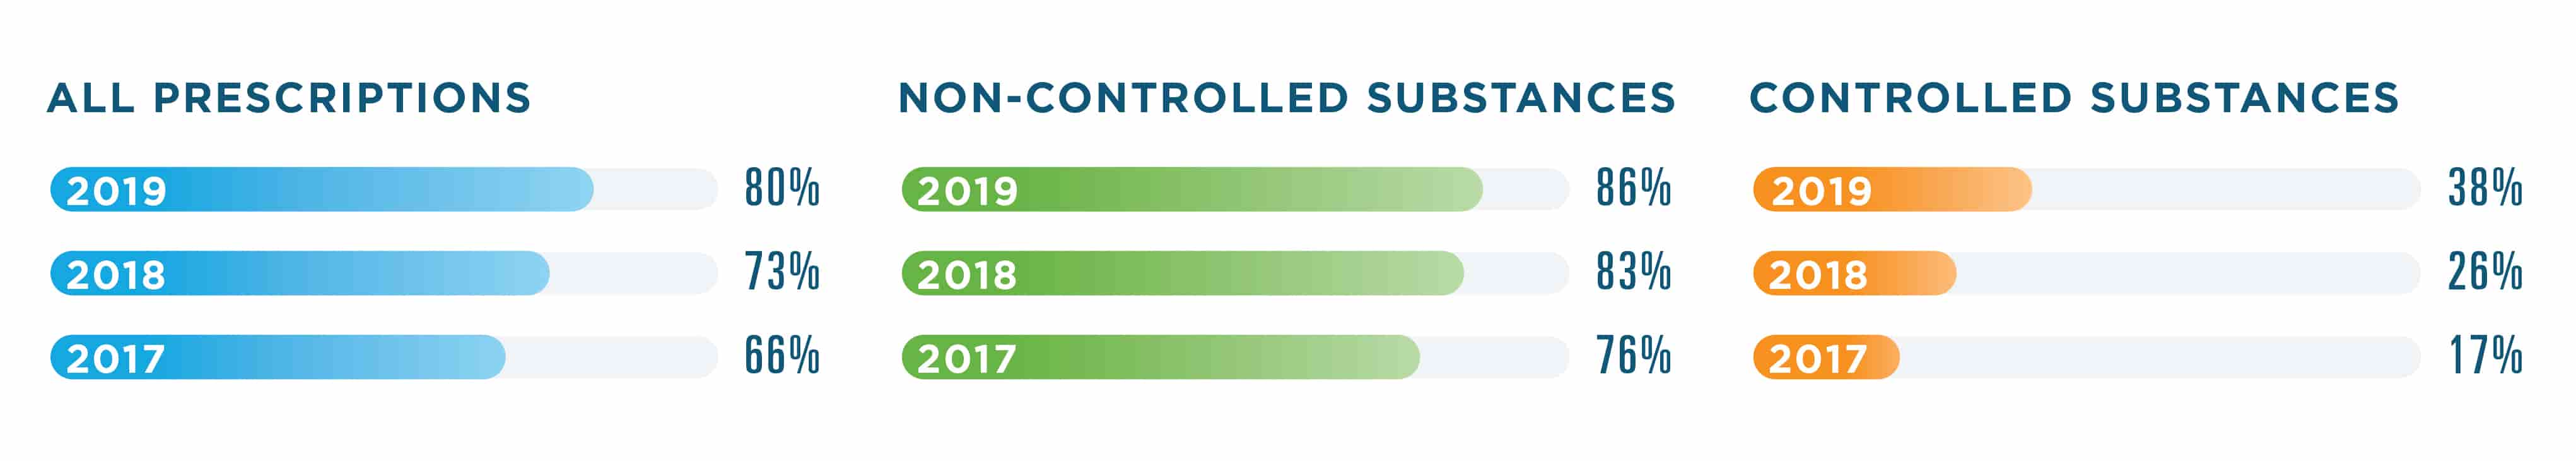 In 2019, 80% of all prescriptions filled were written electronically, compared to 73% in 2018 and 66% in 2017. For non-controlled substances, the rate of e-prescribing was 86% in 2019, 83% in 2018 and 76% in 2017. For controlled substances, the rate of e-prescribing was 38% in 2019, 26% in 2018 and 17% in 2017.